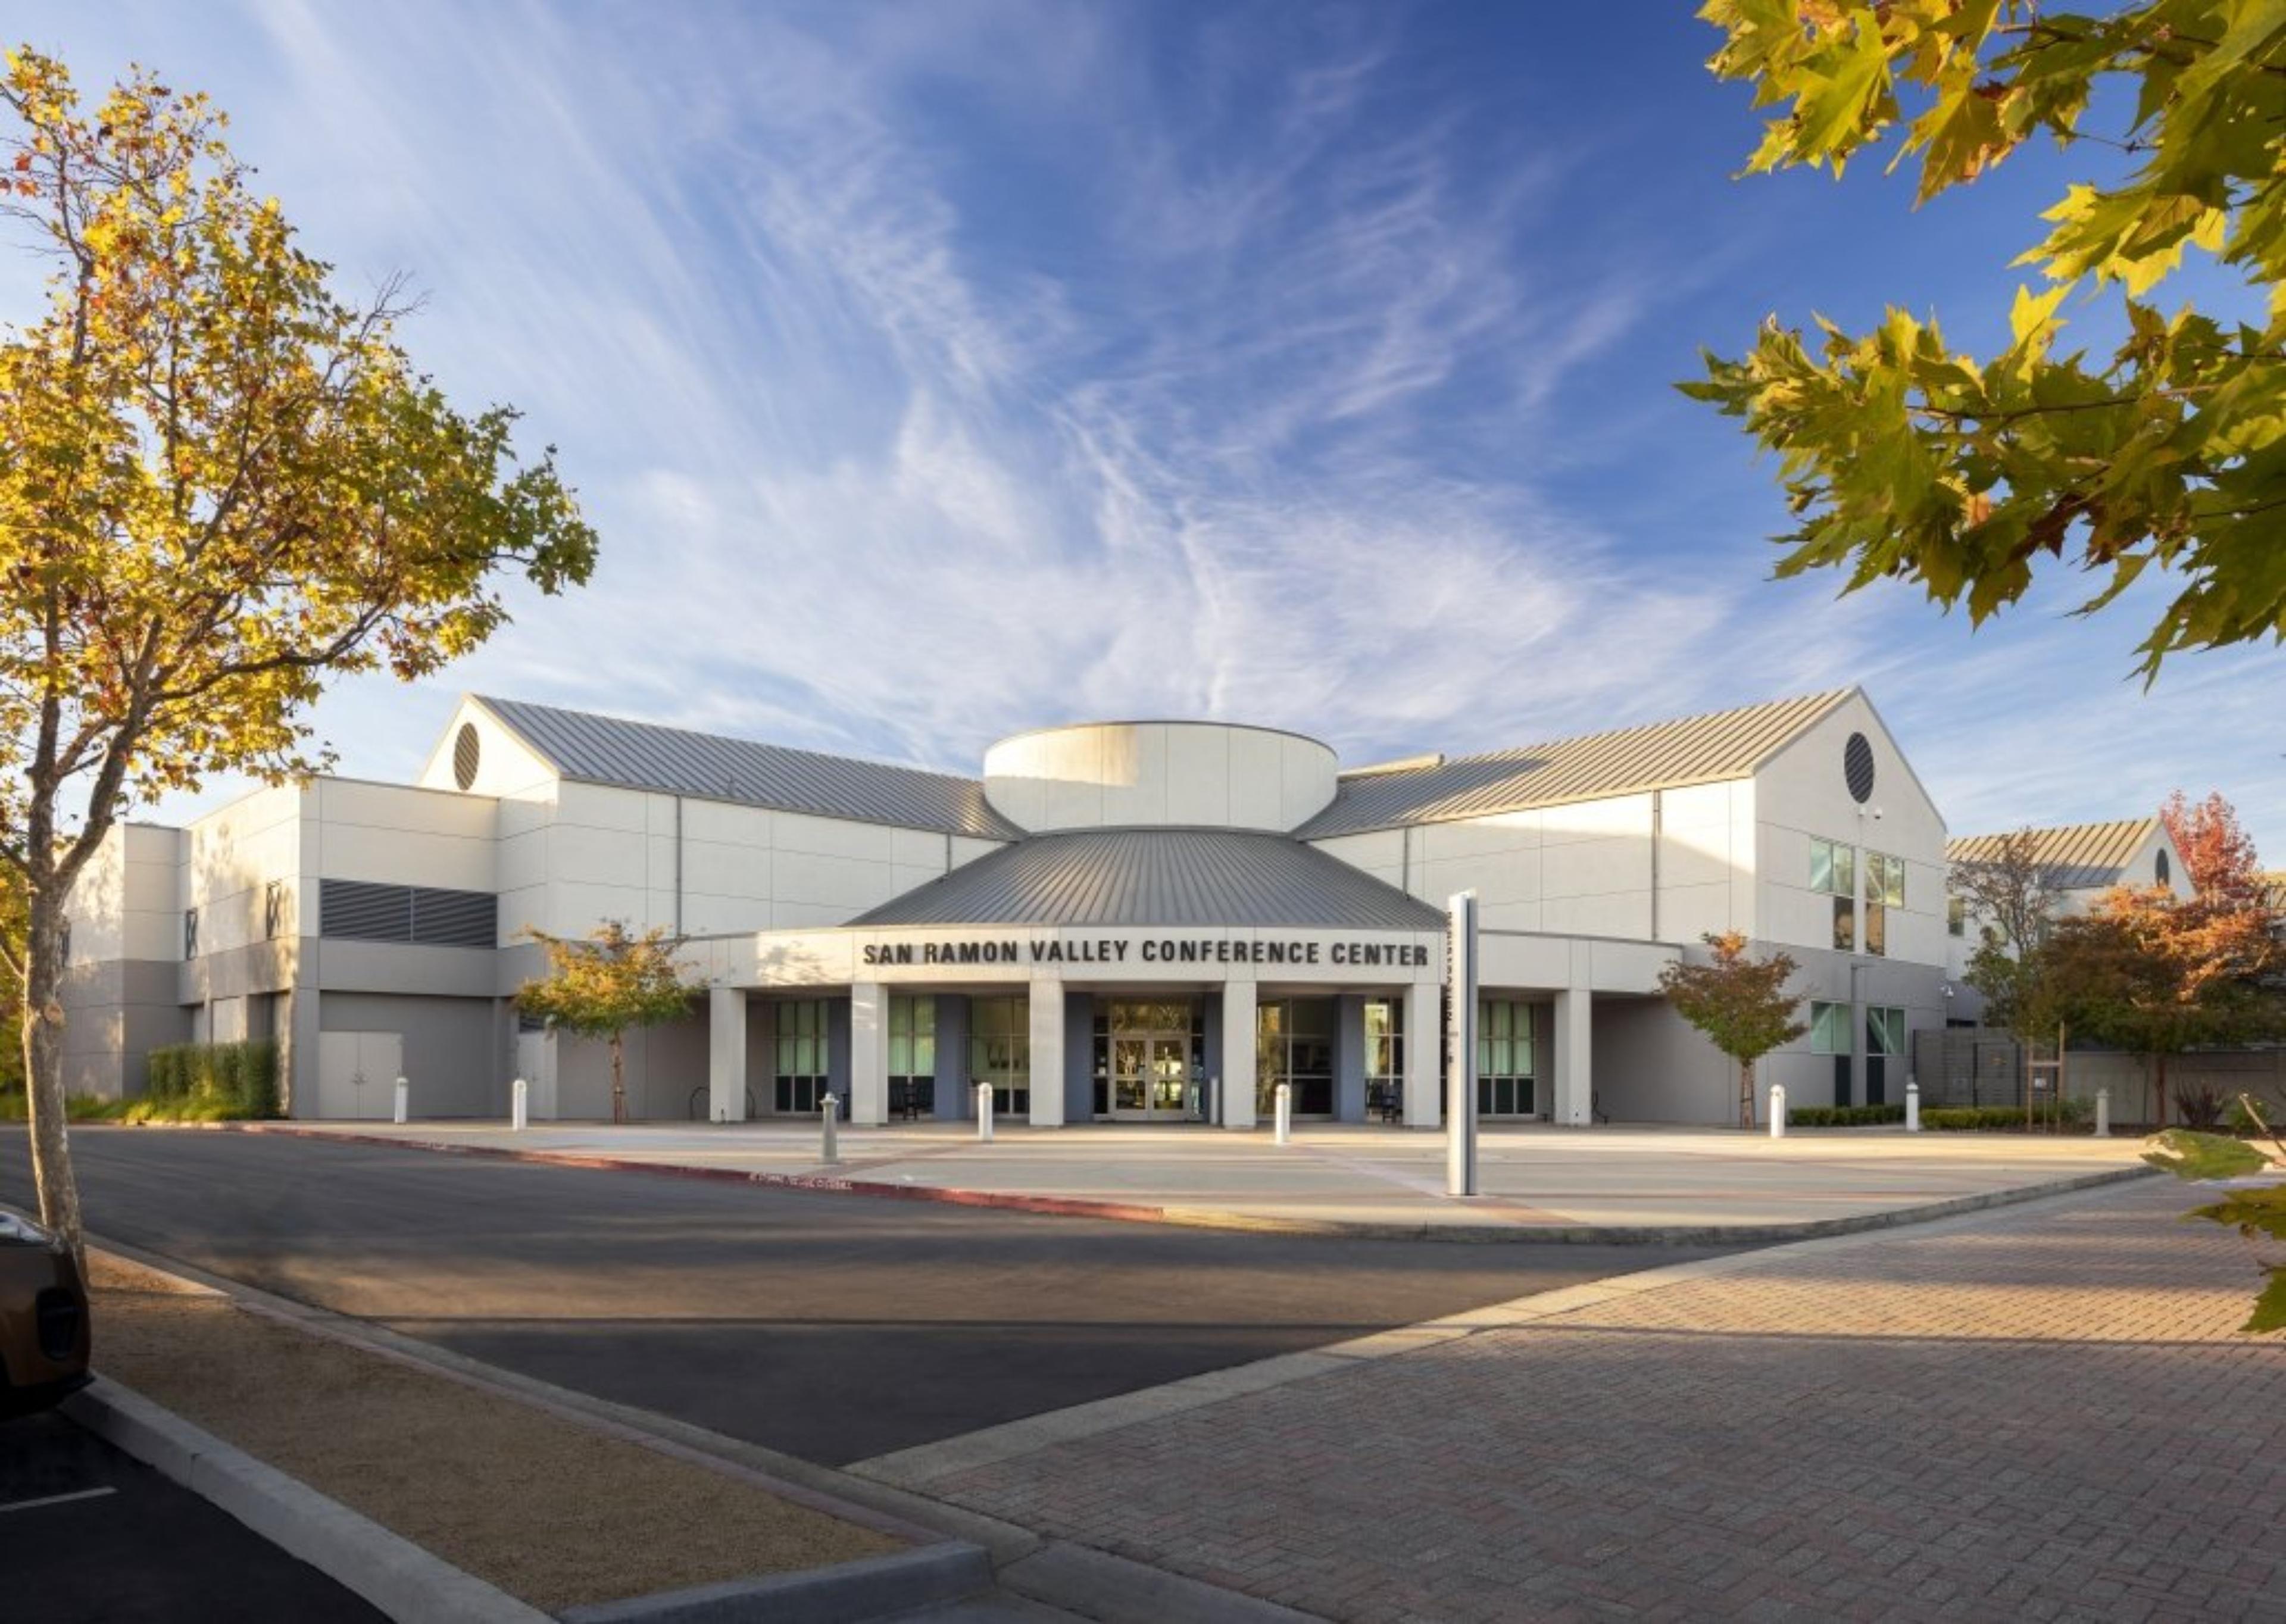 San Ramon Valley Conference Center